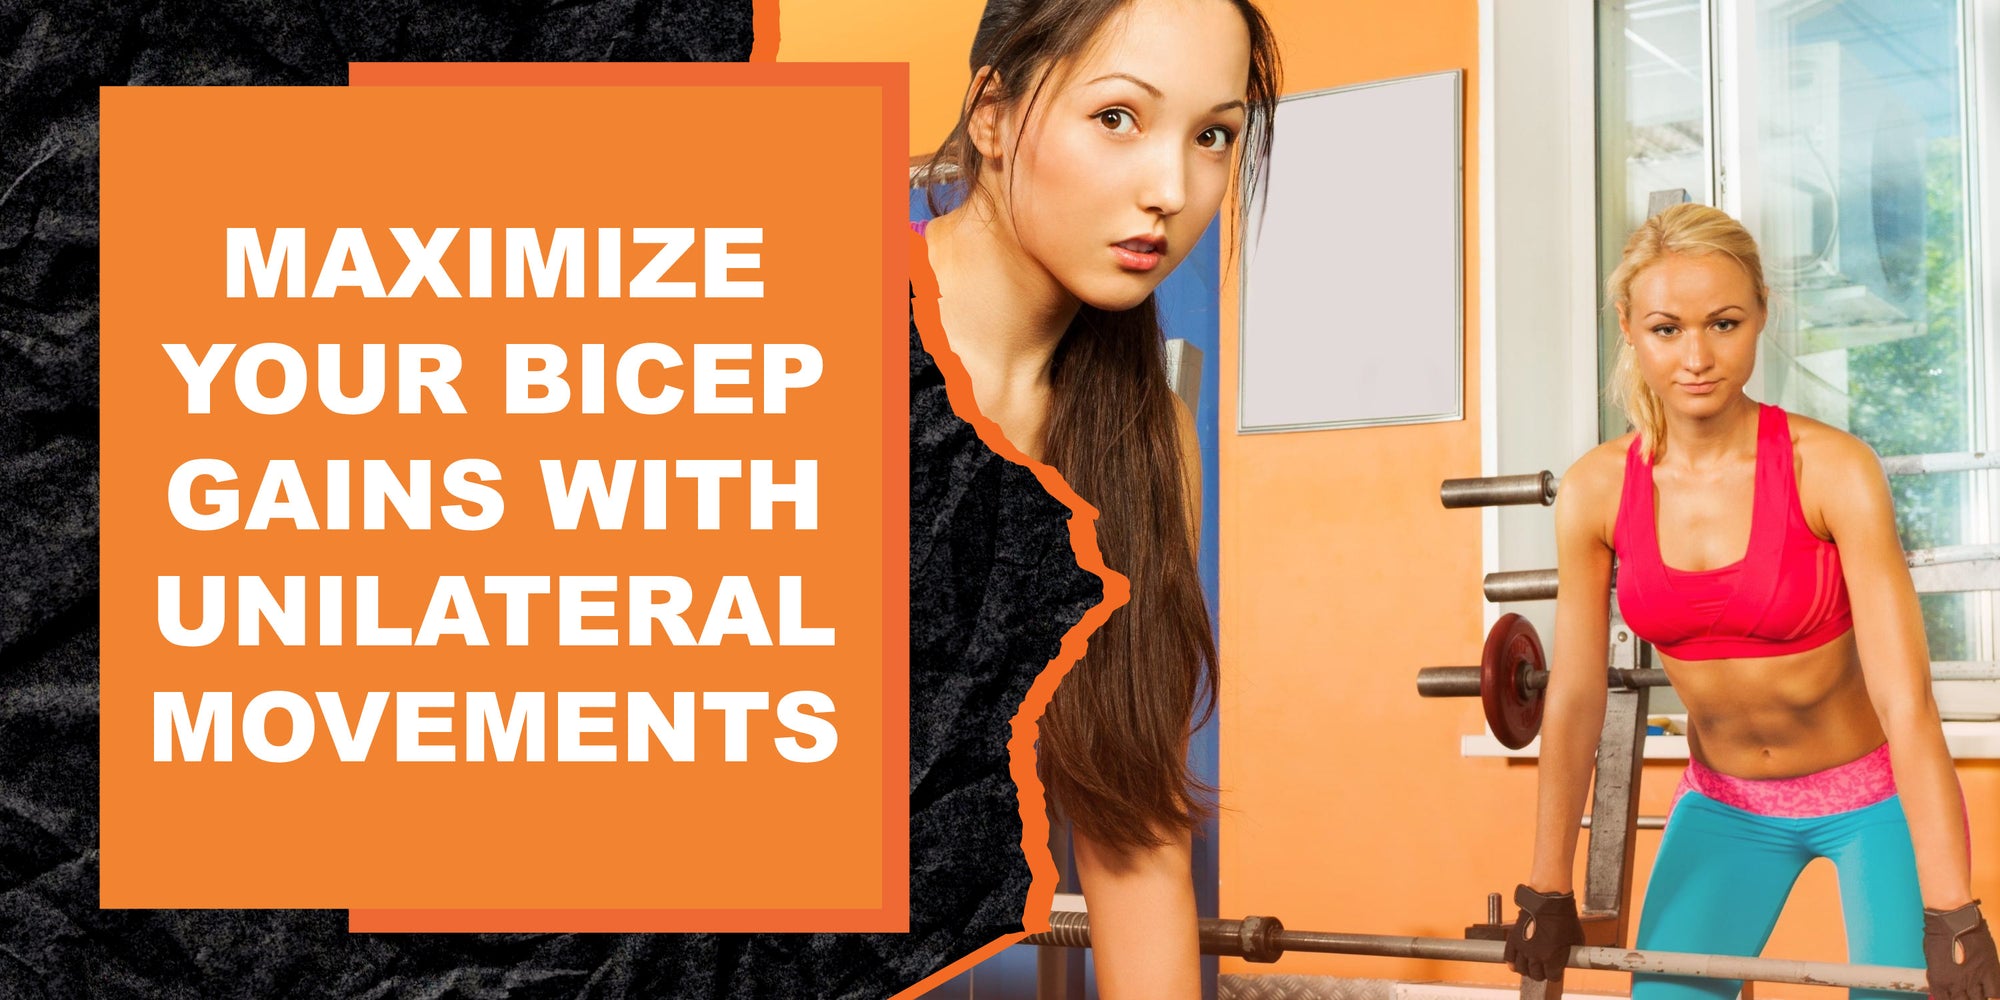 How to Maximize Your Bicep Gains with Unilateral Movements